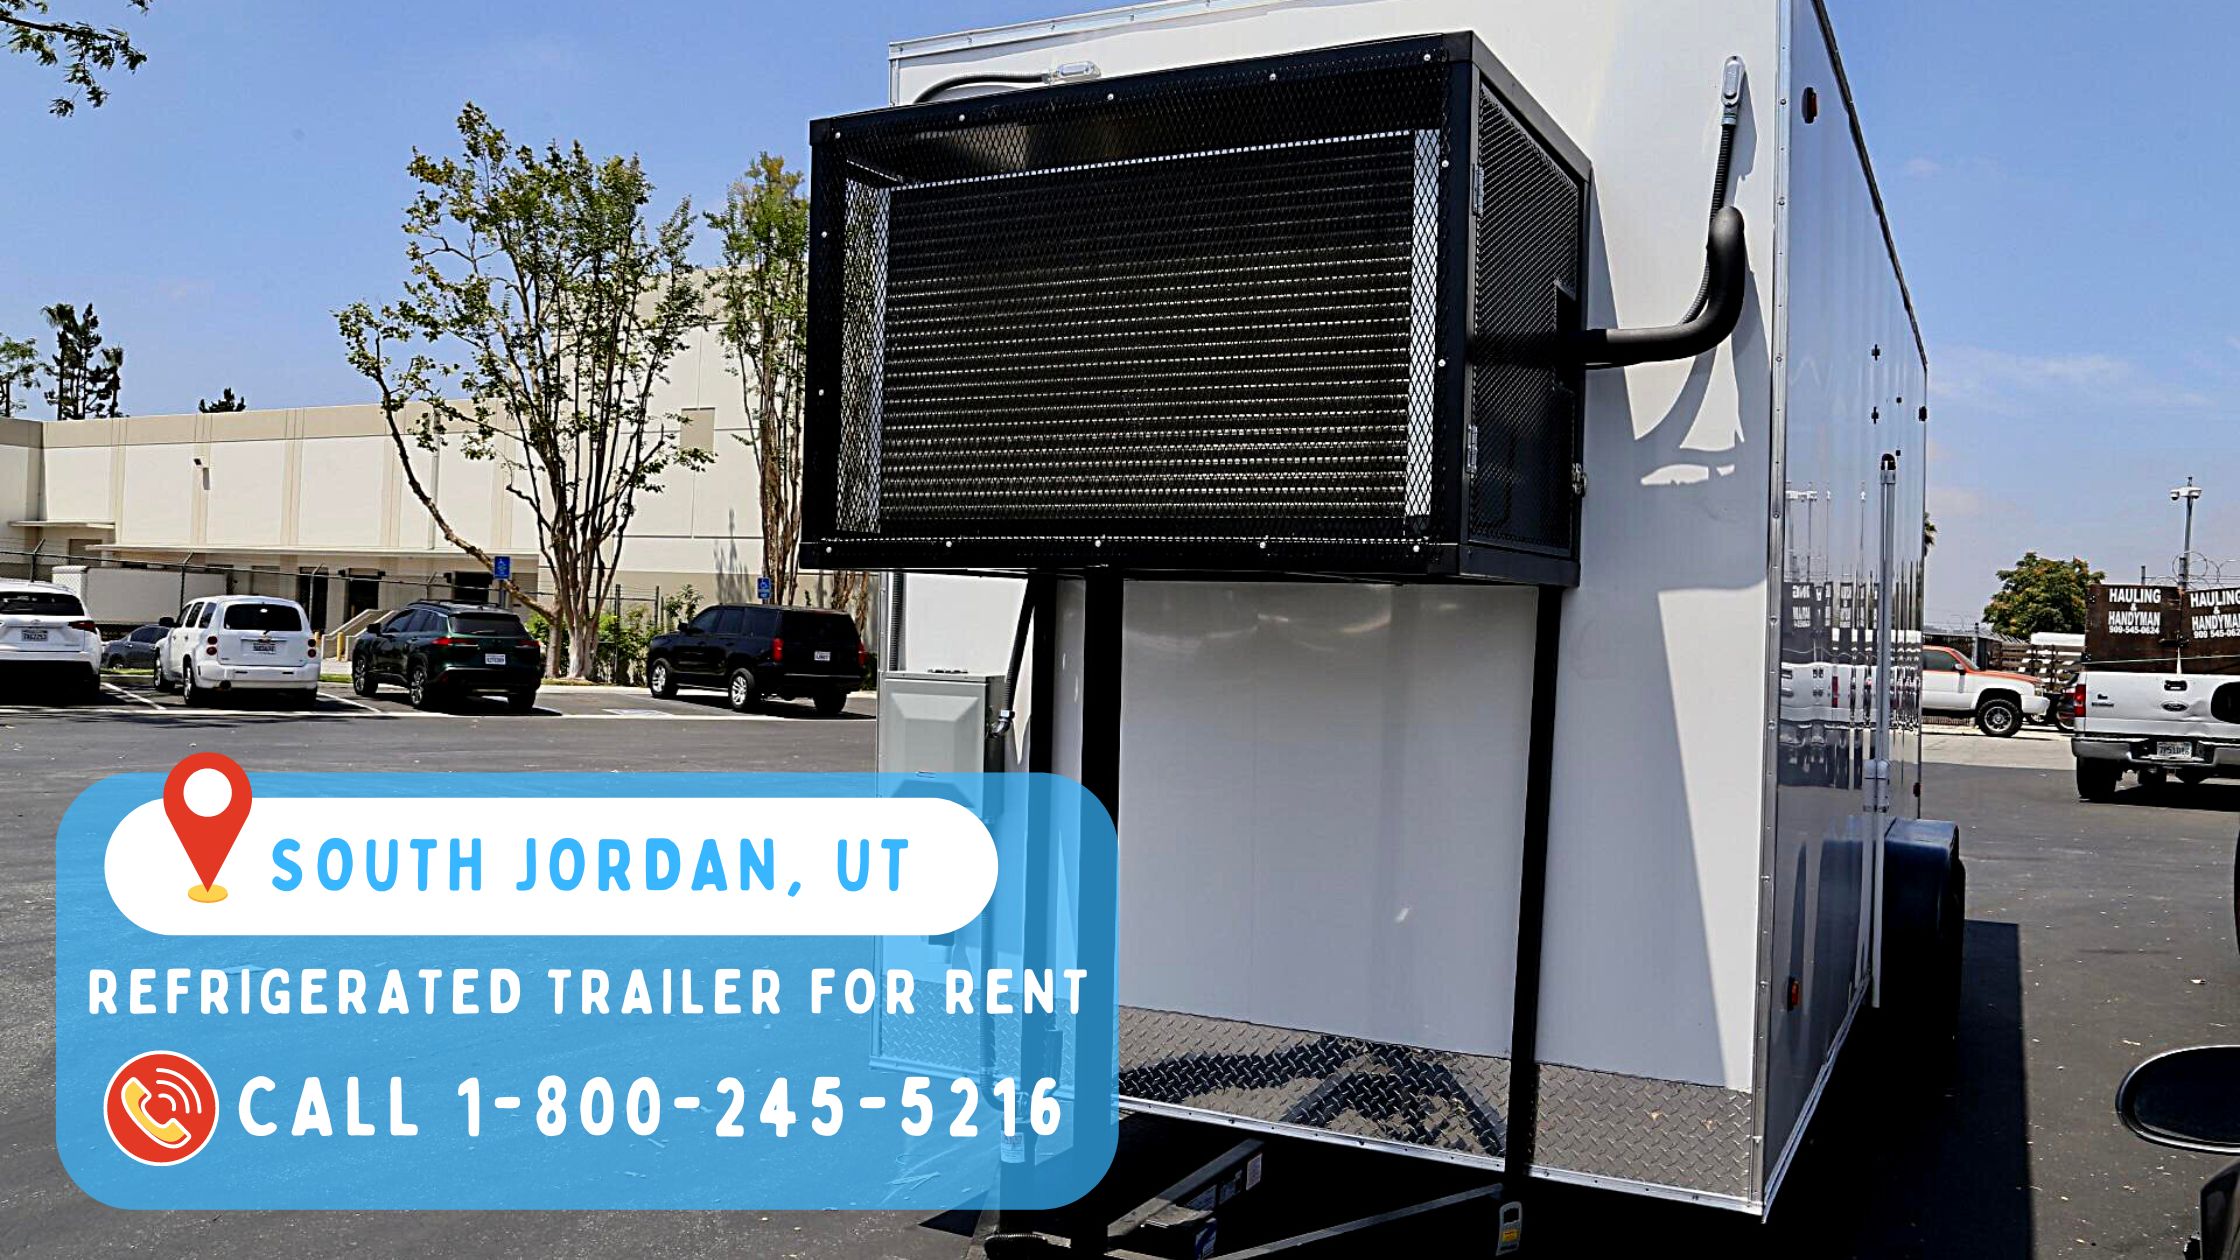 Refrigerated Trailer for Rent in South Jordan